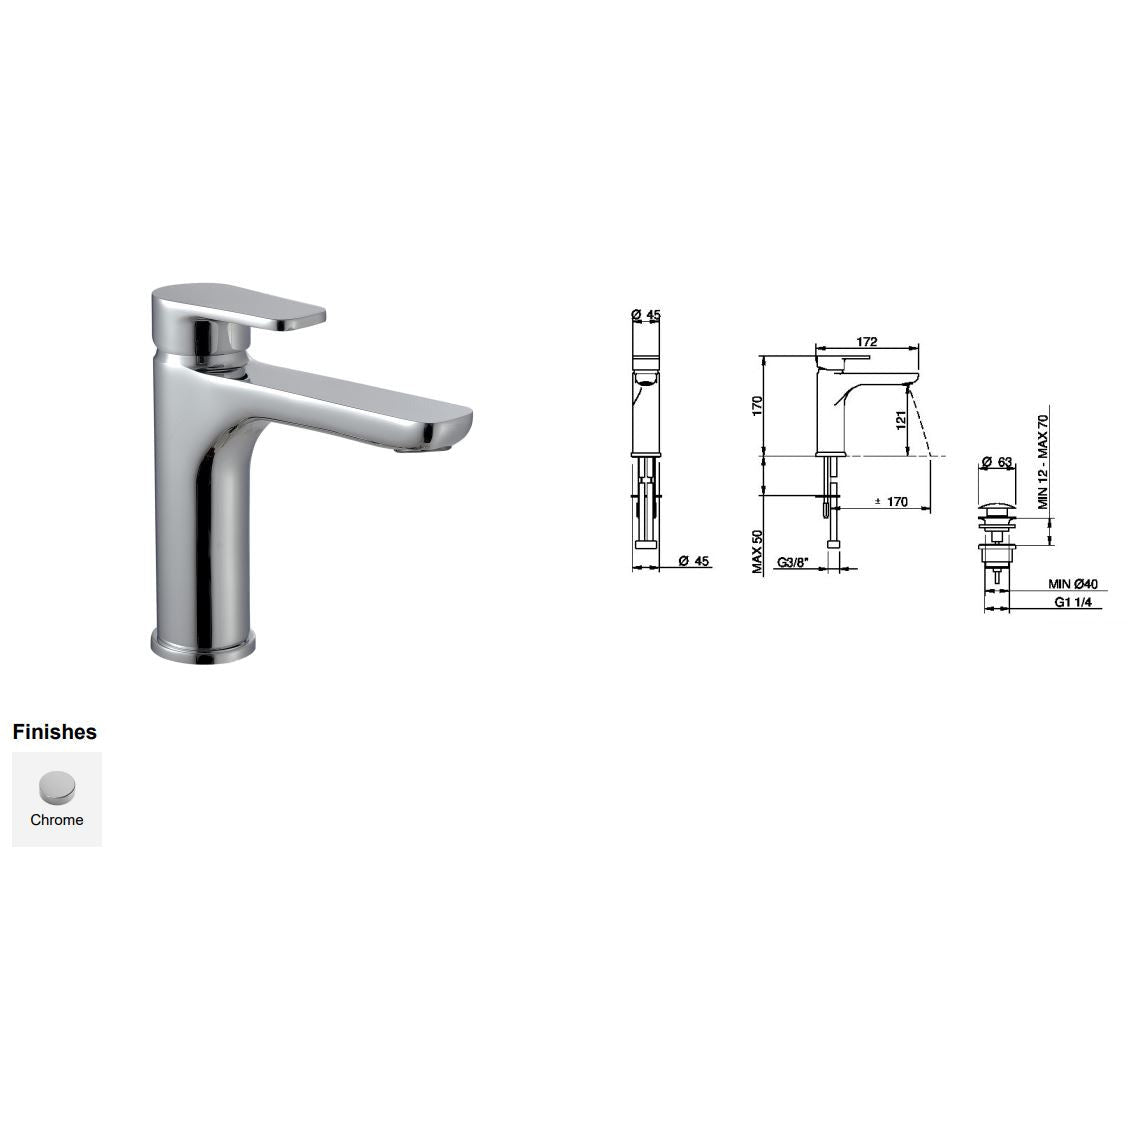 Zip, single lever basin mixer tap - A chic fitting - Letta London - Basin Taps